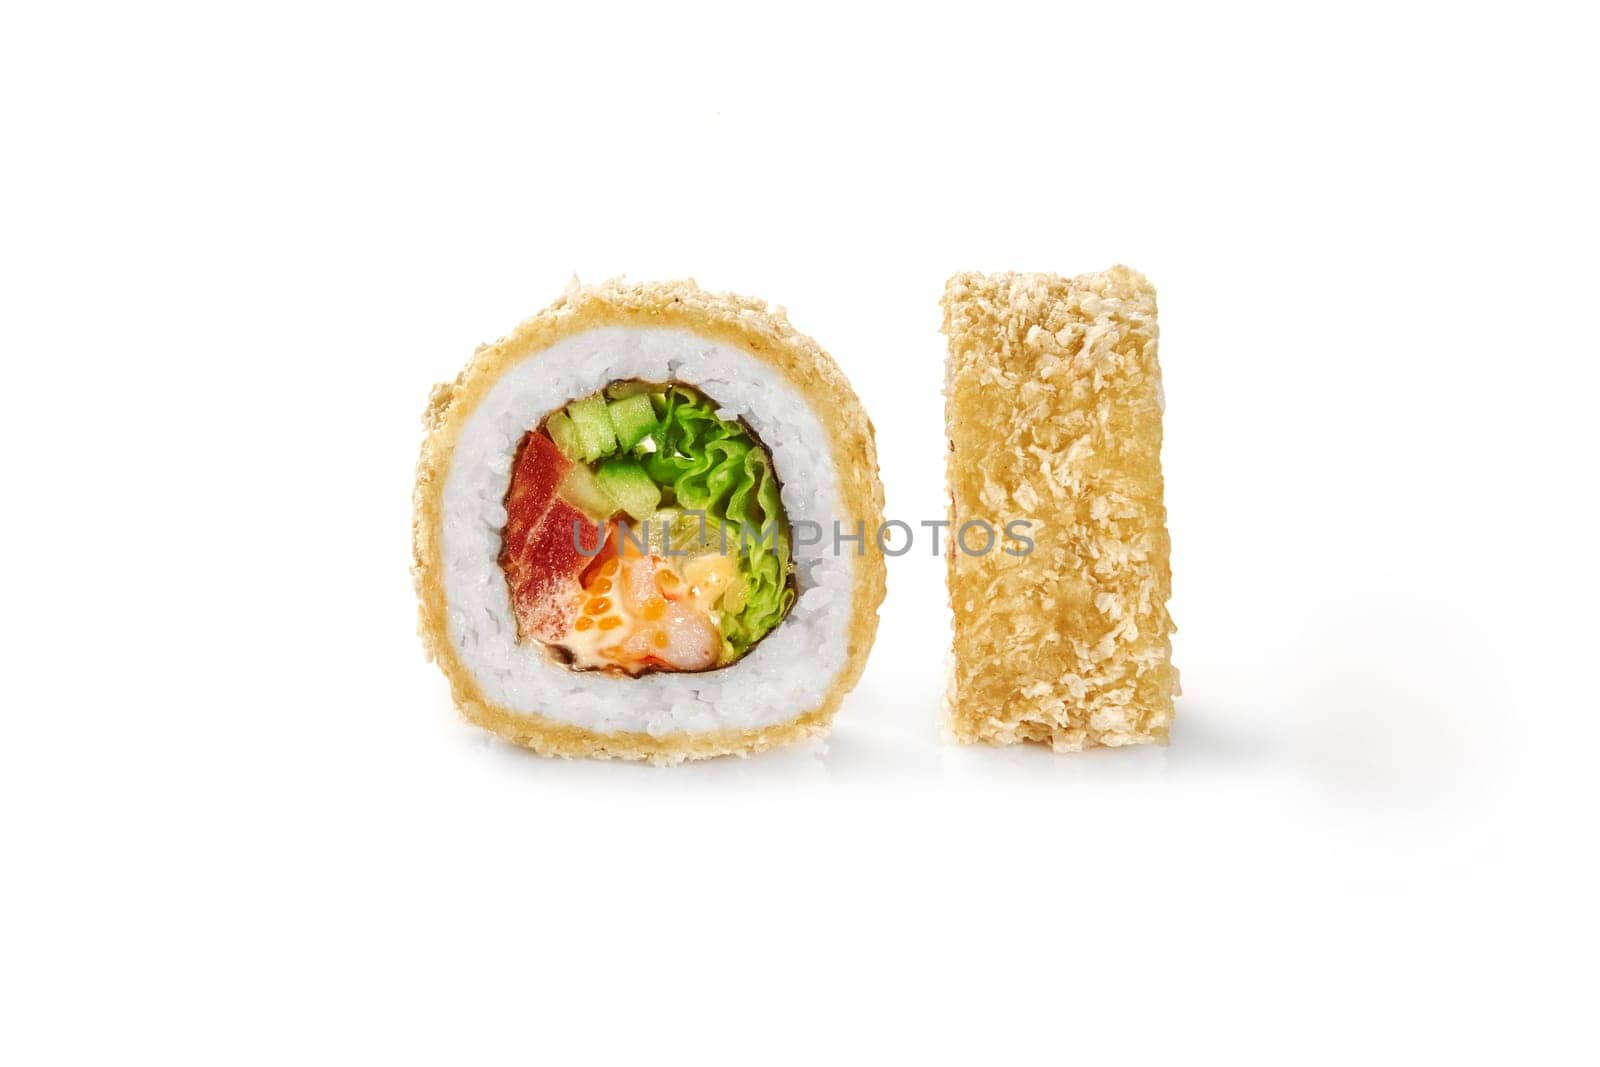 Closeup detailed view of crispy tempura roll with tiger prawn, tobiko roe, tomatoes, cucumber and iceberg lettuce covered with panko breadcrumbs, isolated on white. Sushi bar menu concept